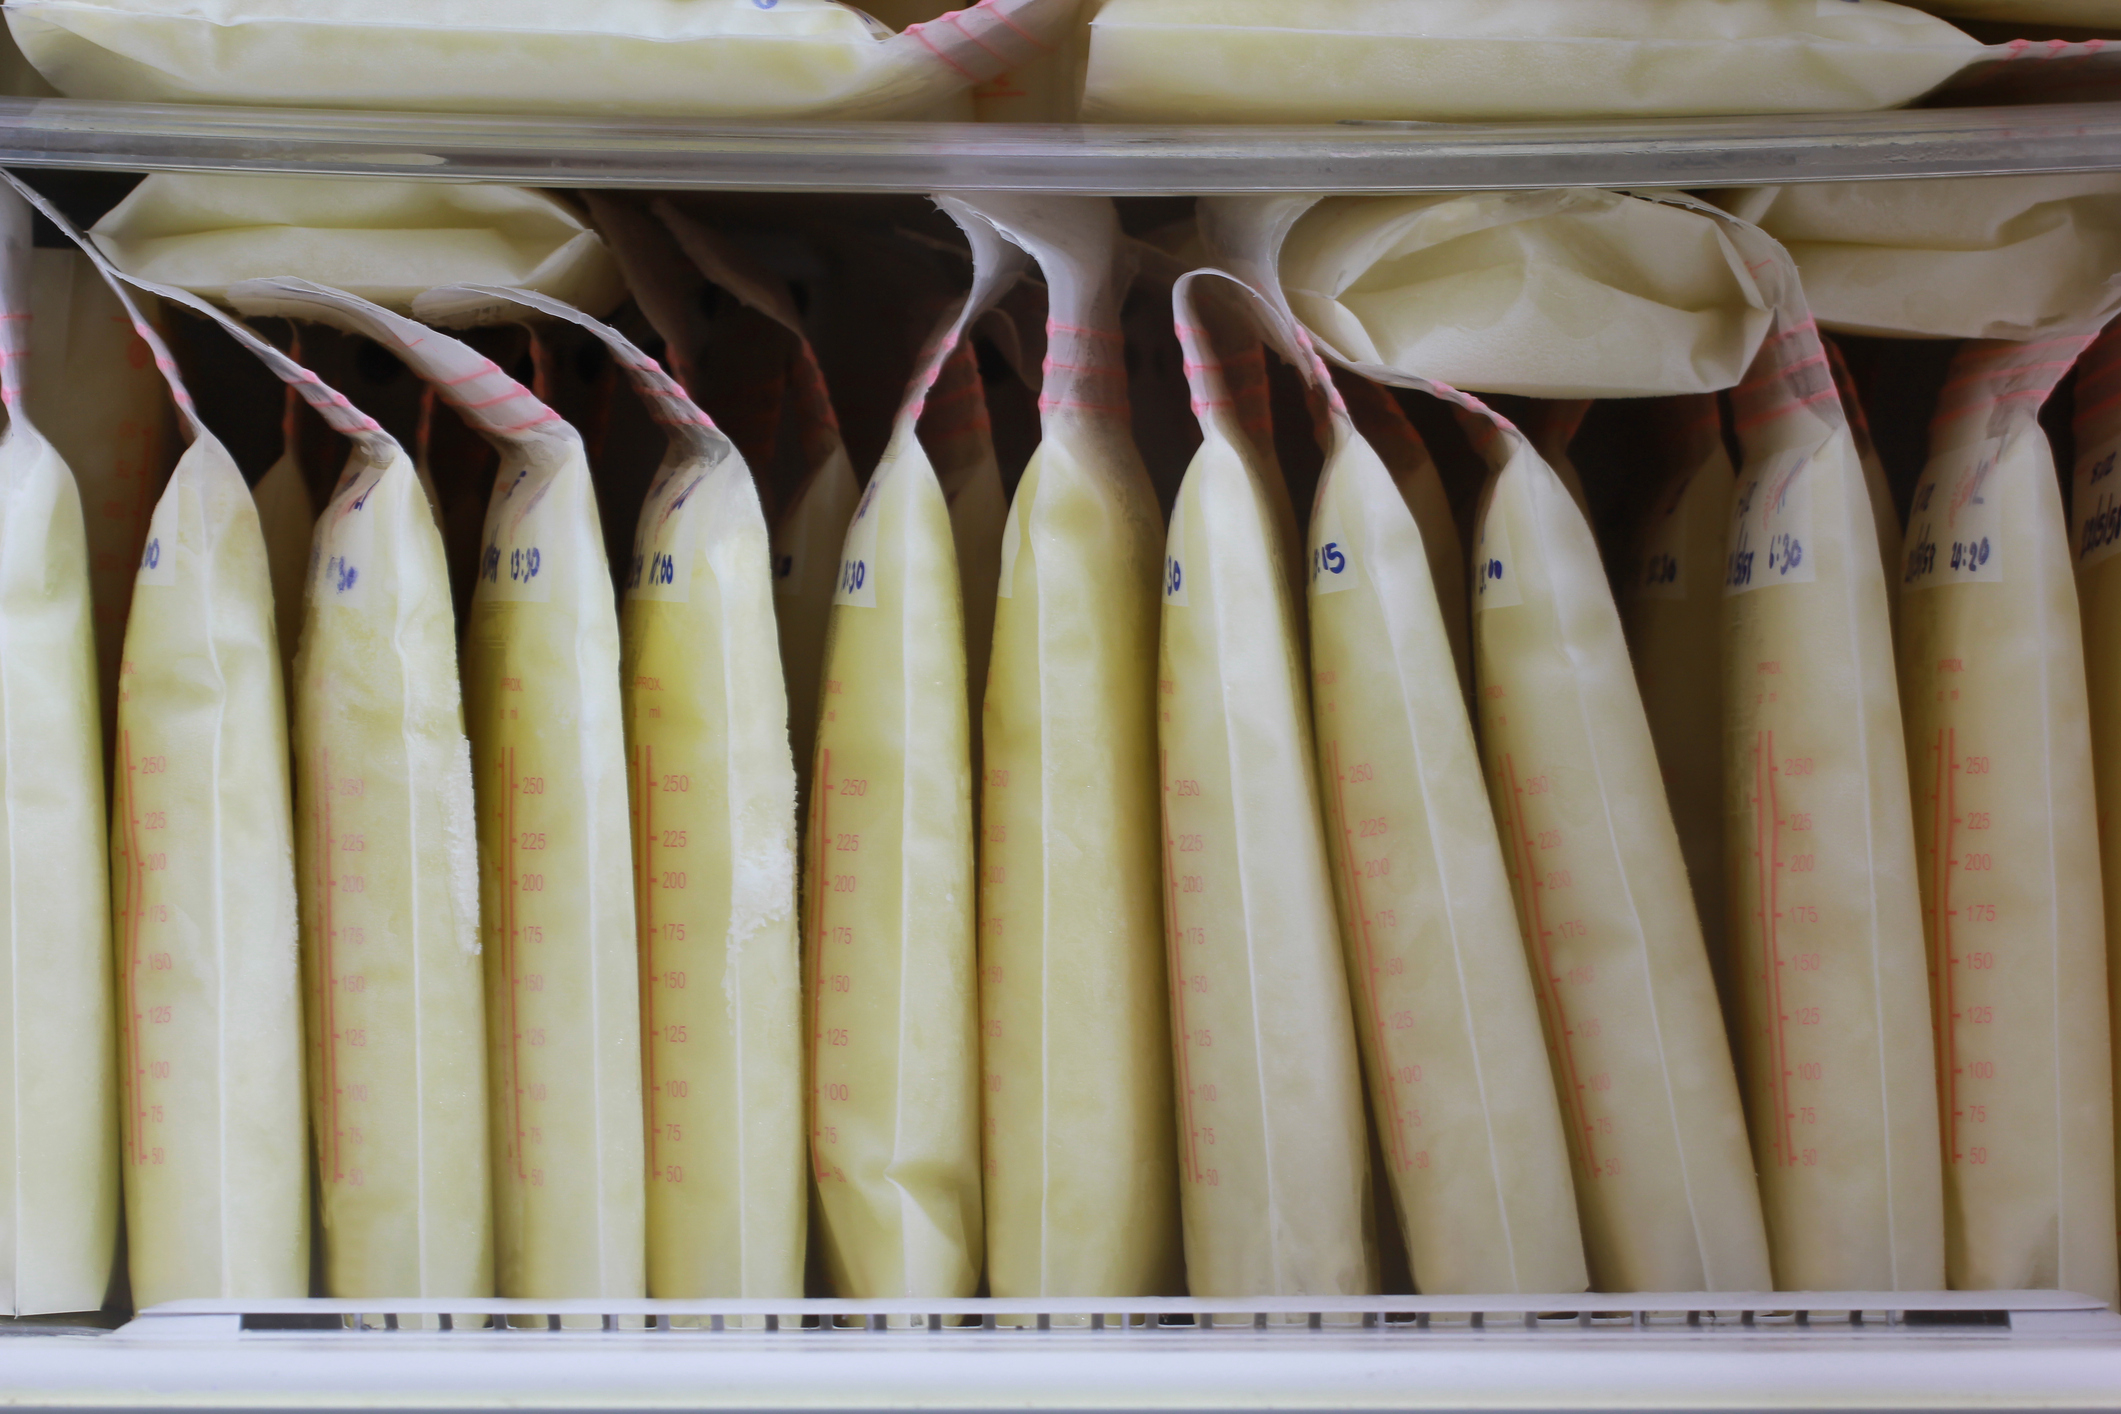 breast milk storage bags for new baby in refrigerator